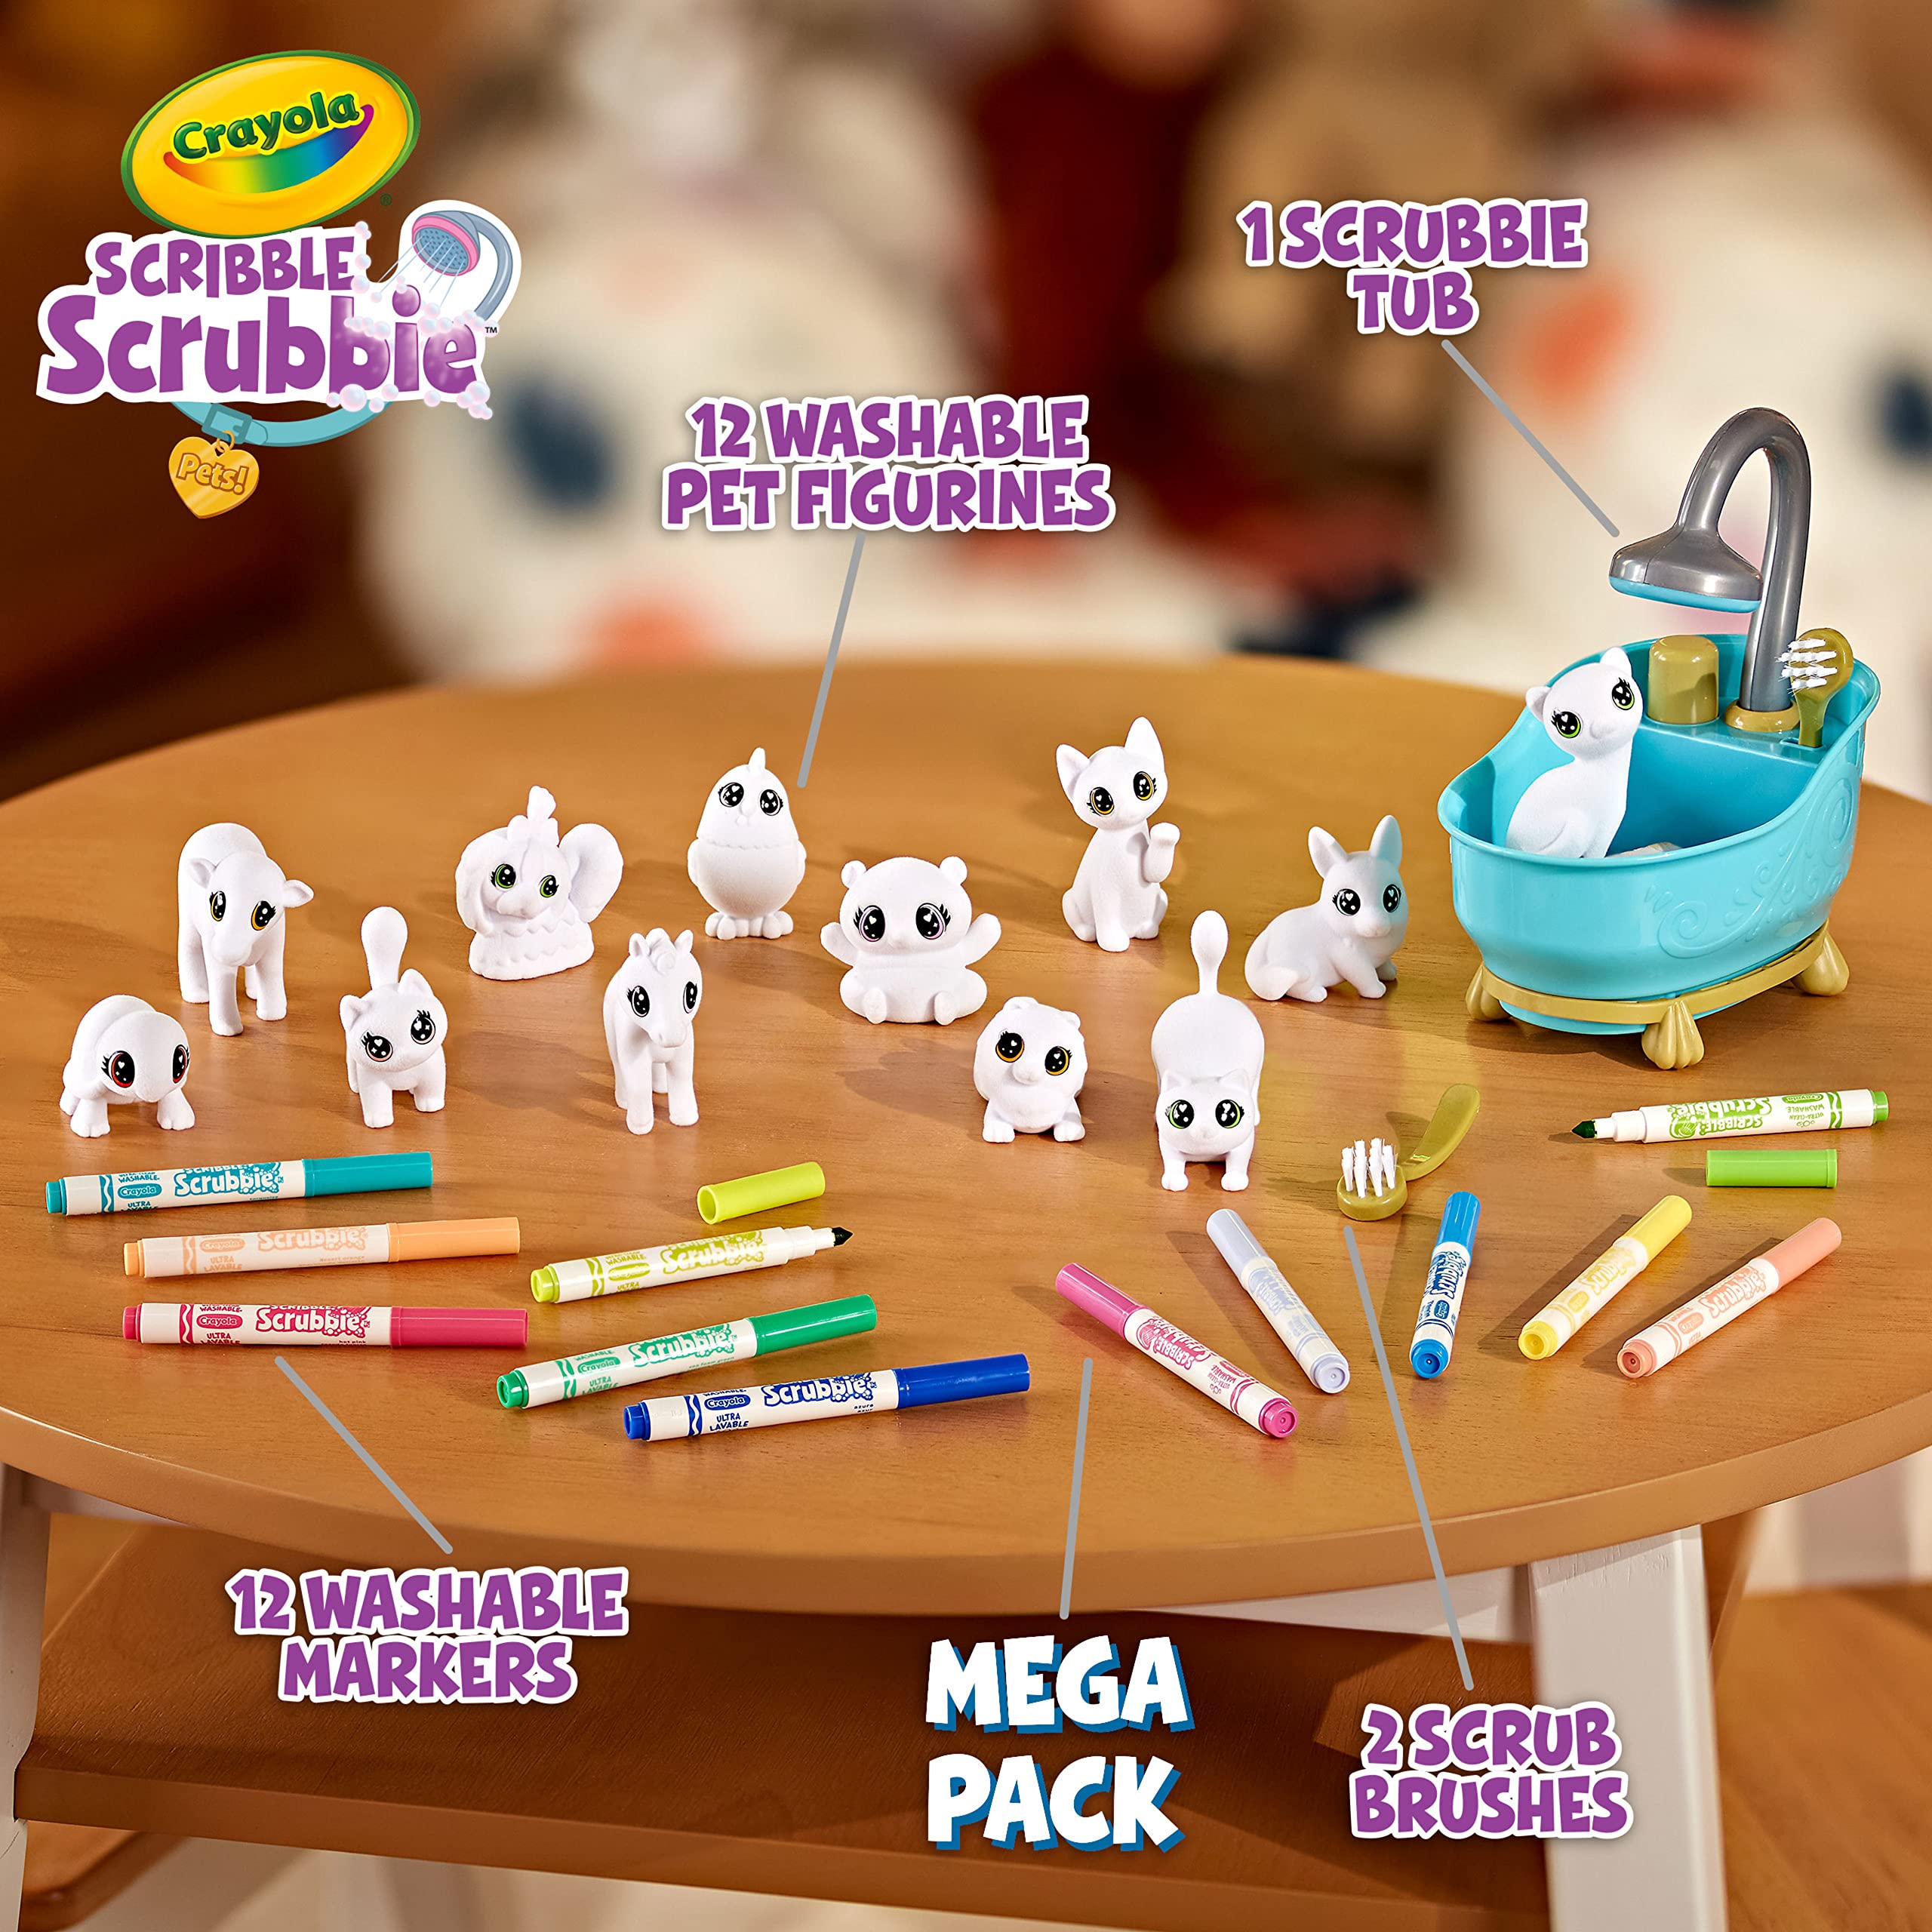 Crayola Scribble Scrubbie Pets Mega Set 2.0, Coloring Toy, Kids Gifts for Girls & Boys, Age 3, 4, 5, 6